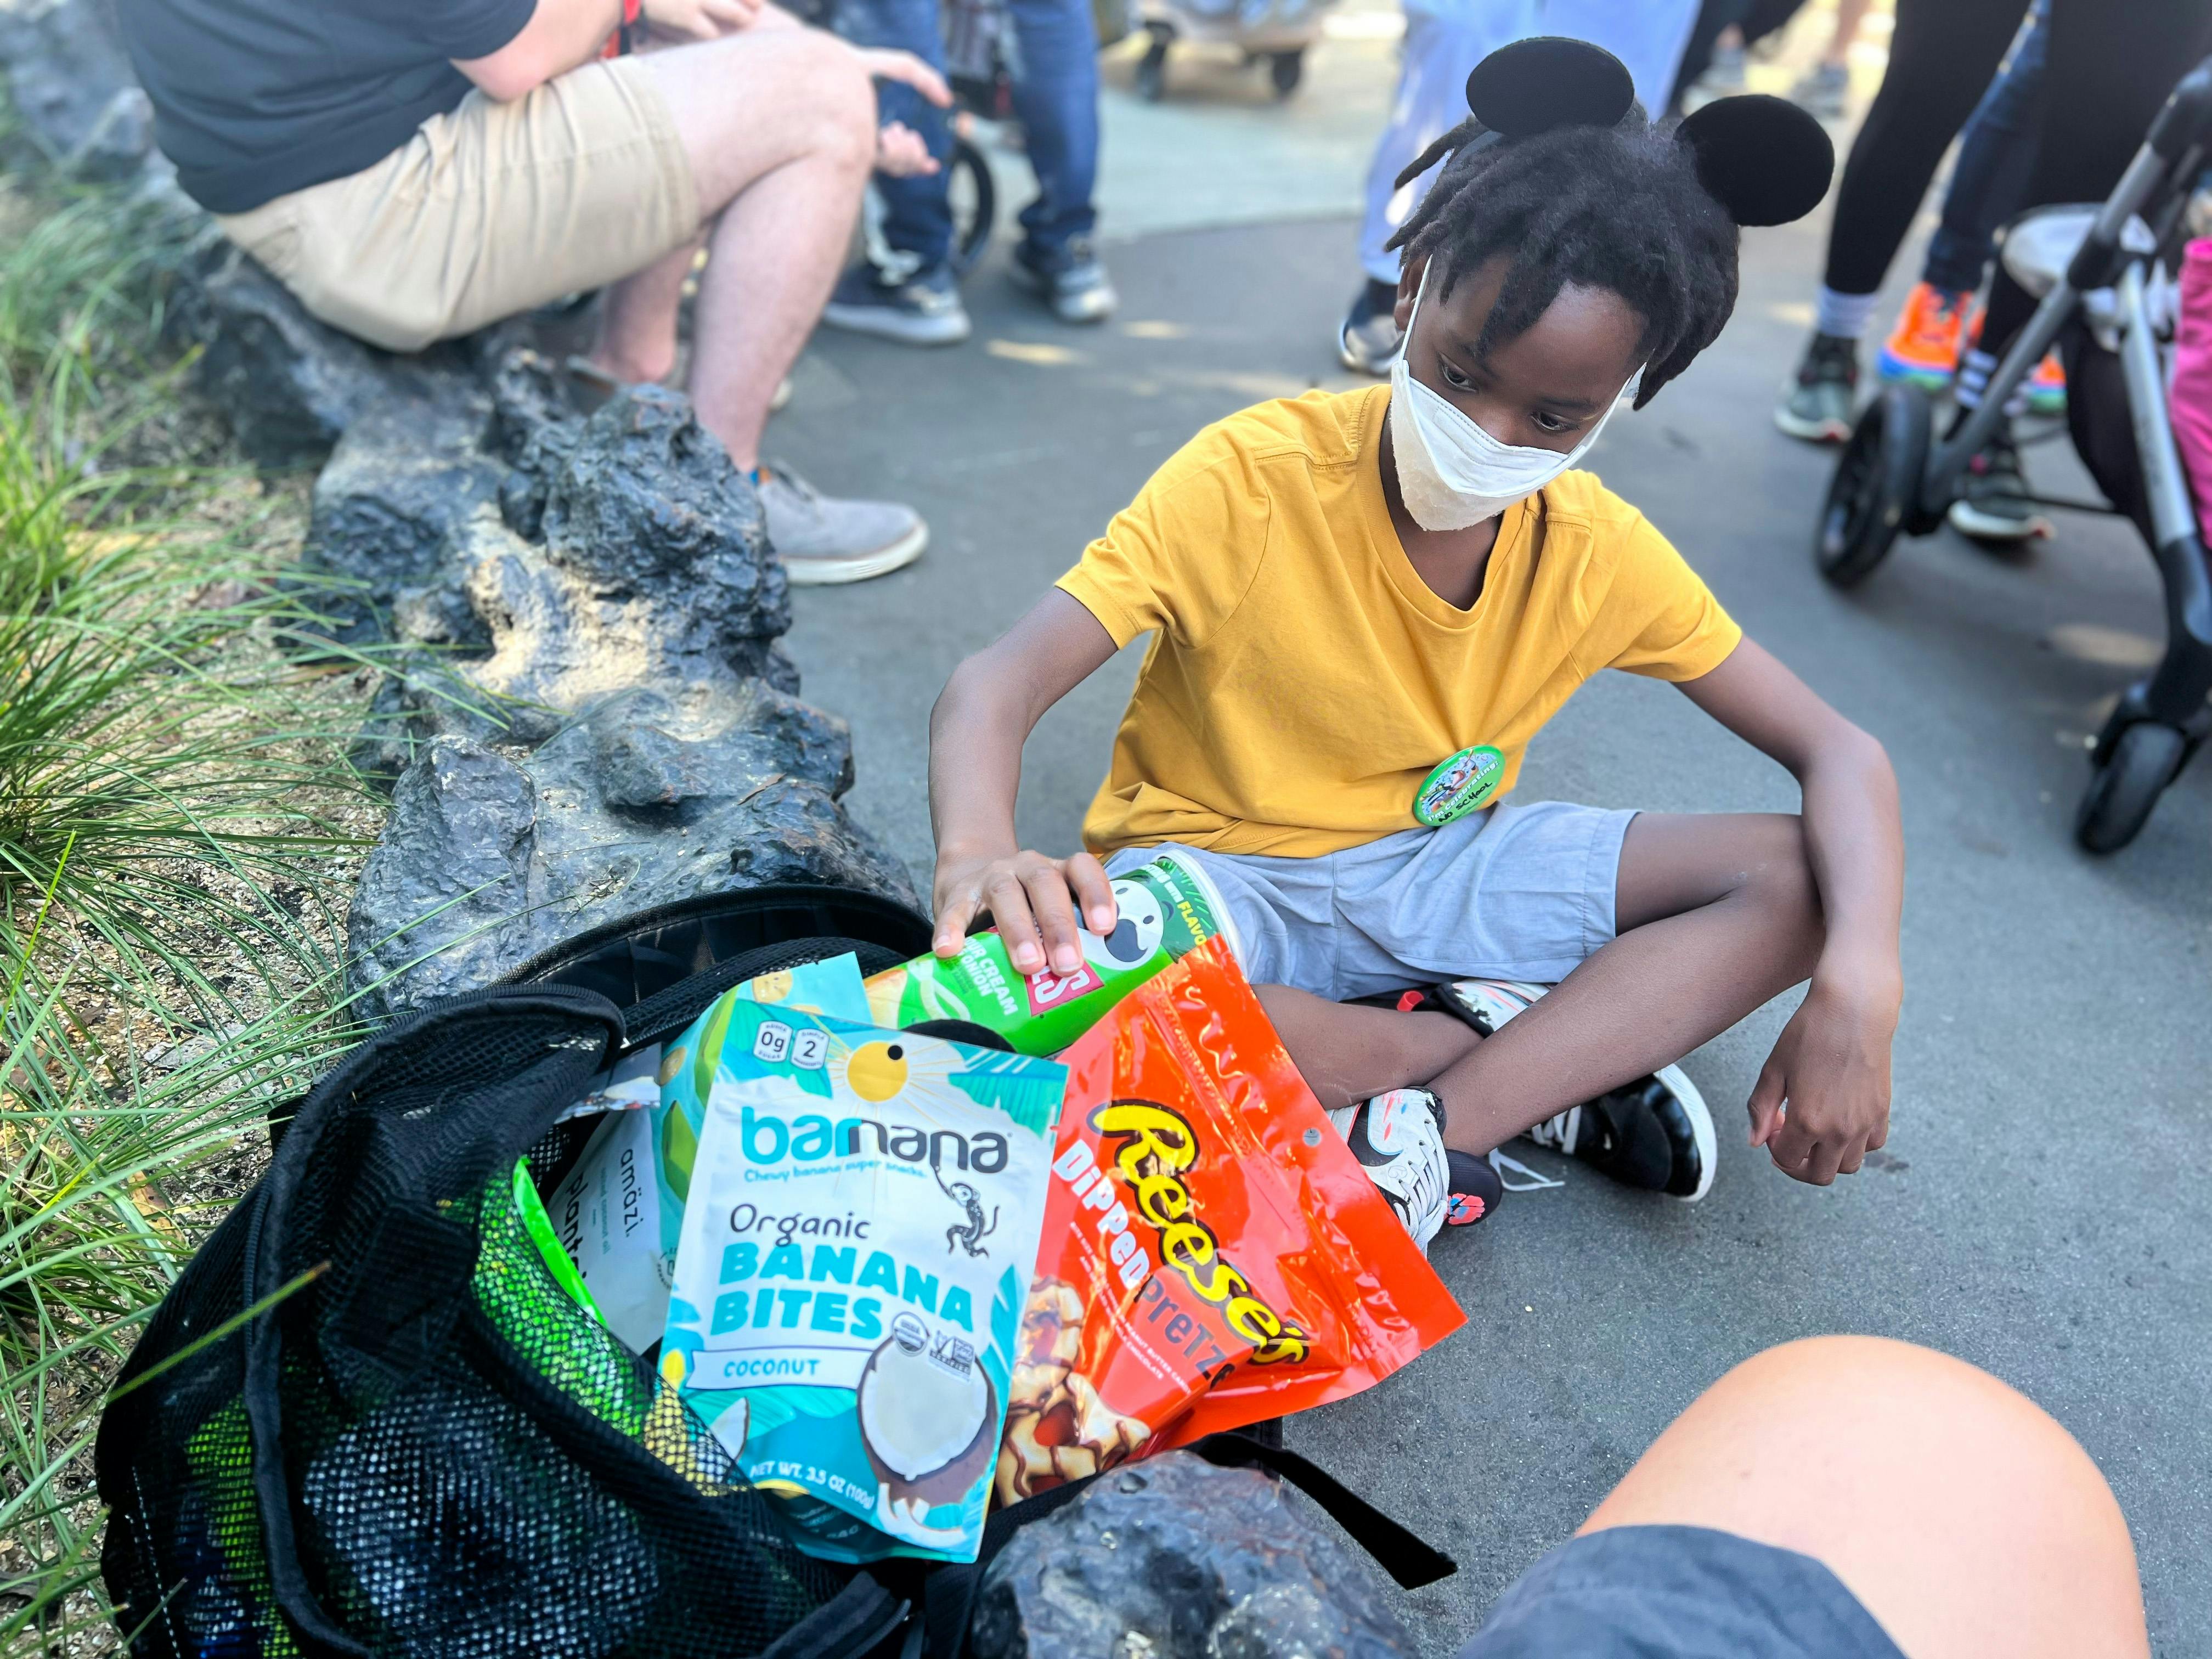 A kid with Mickey Mouse ears pulls snacks from a bag at Disney World